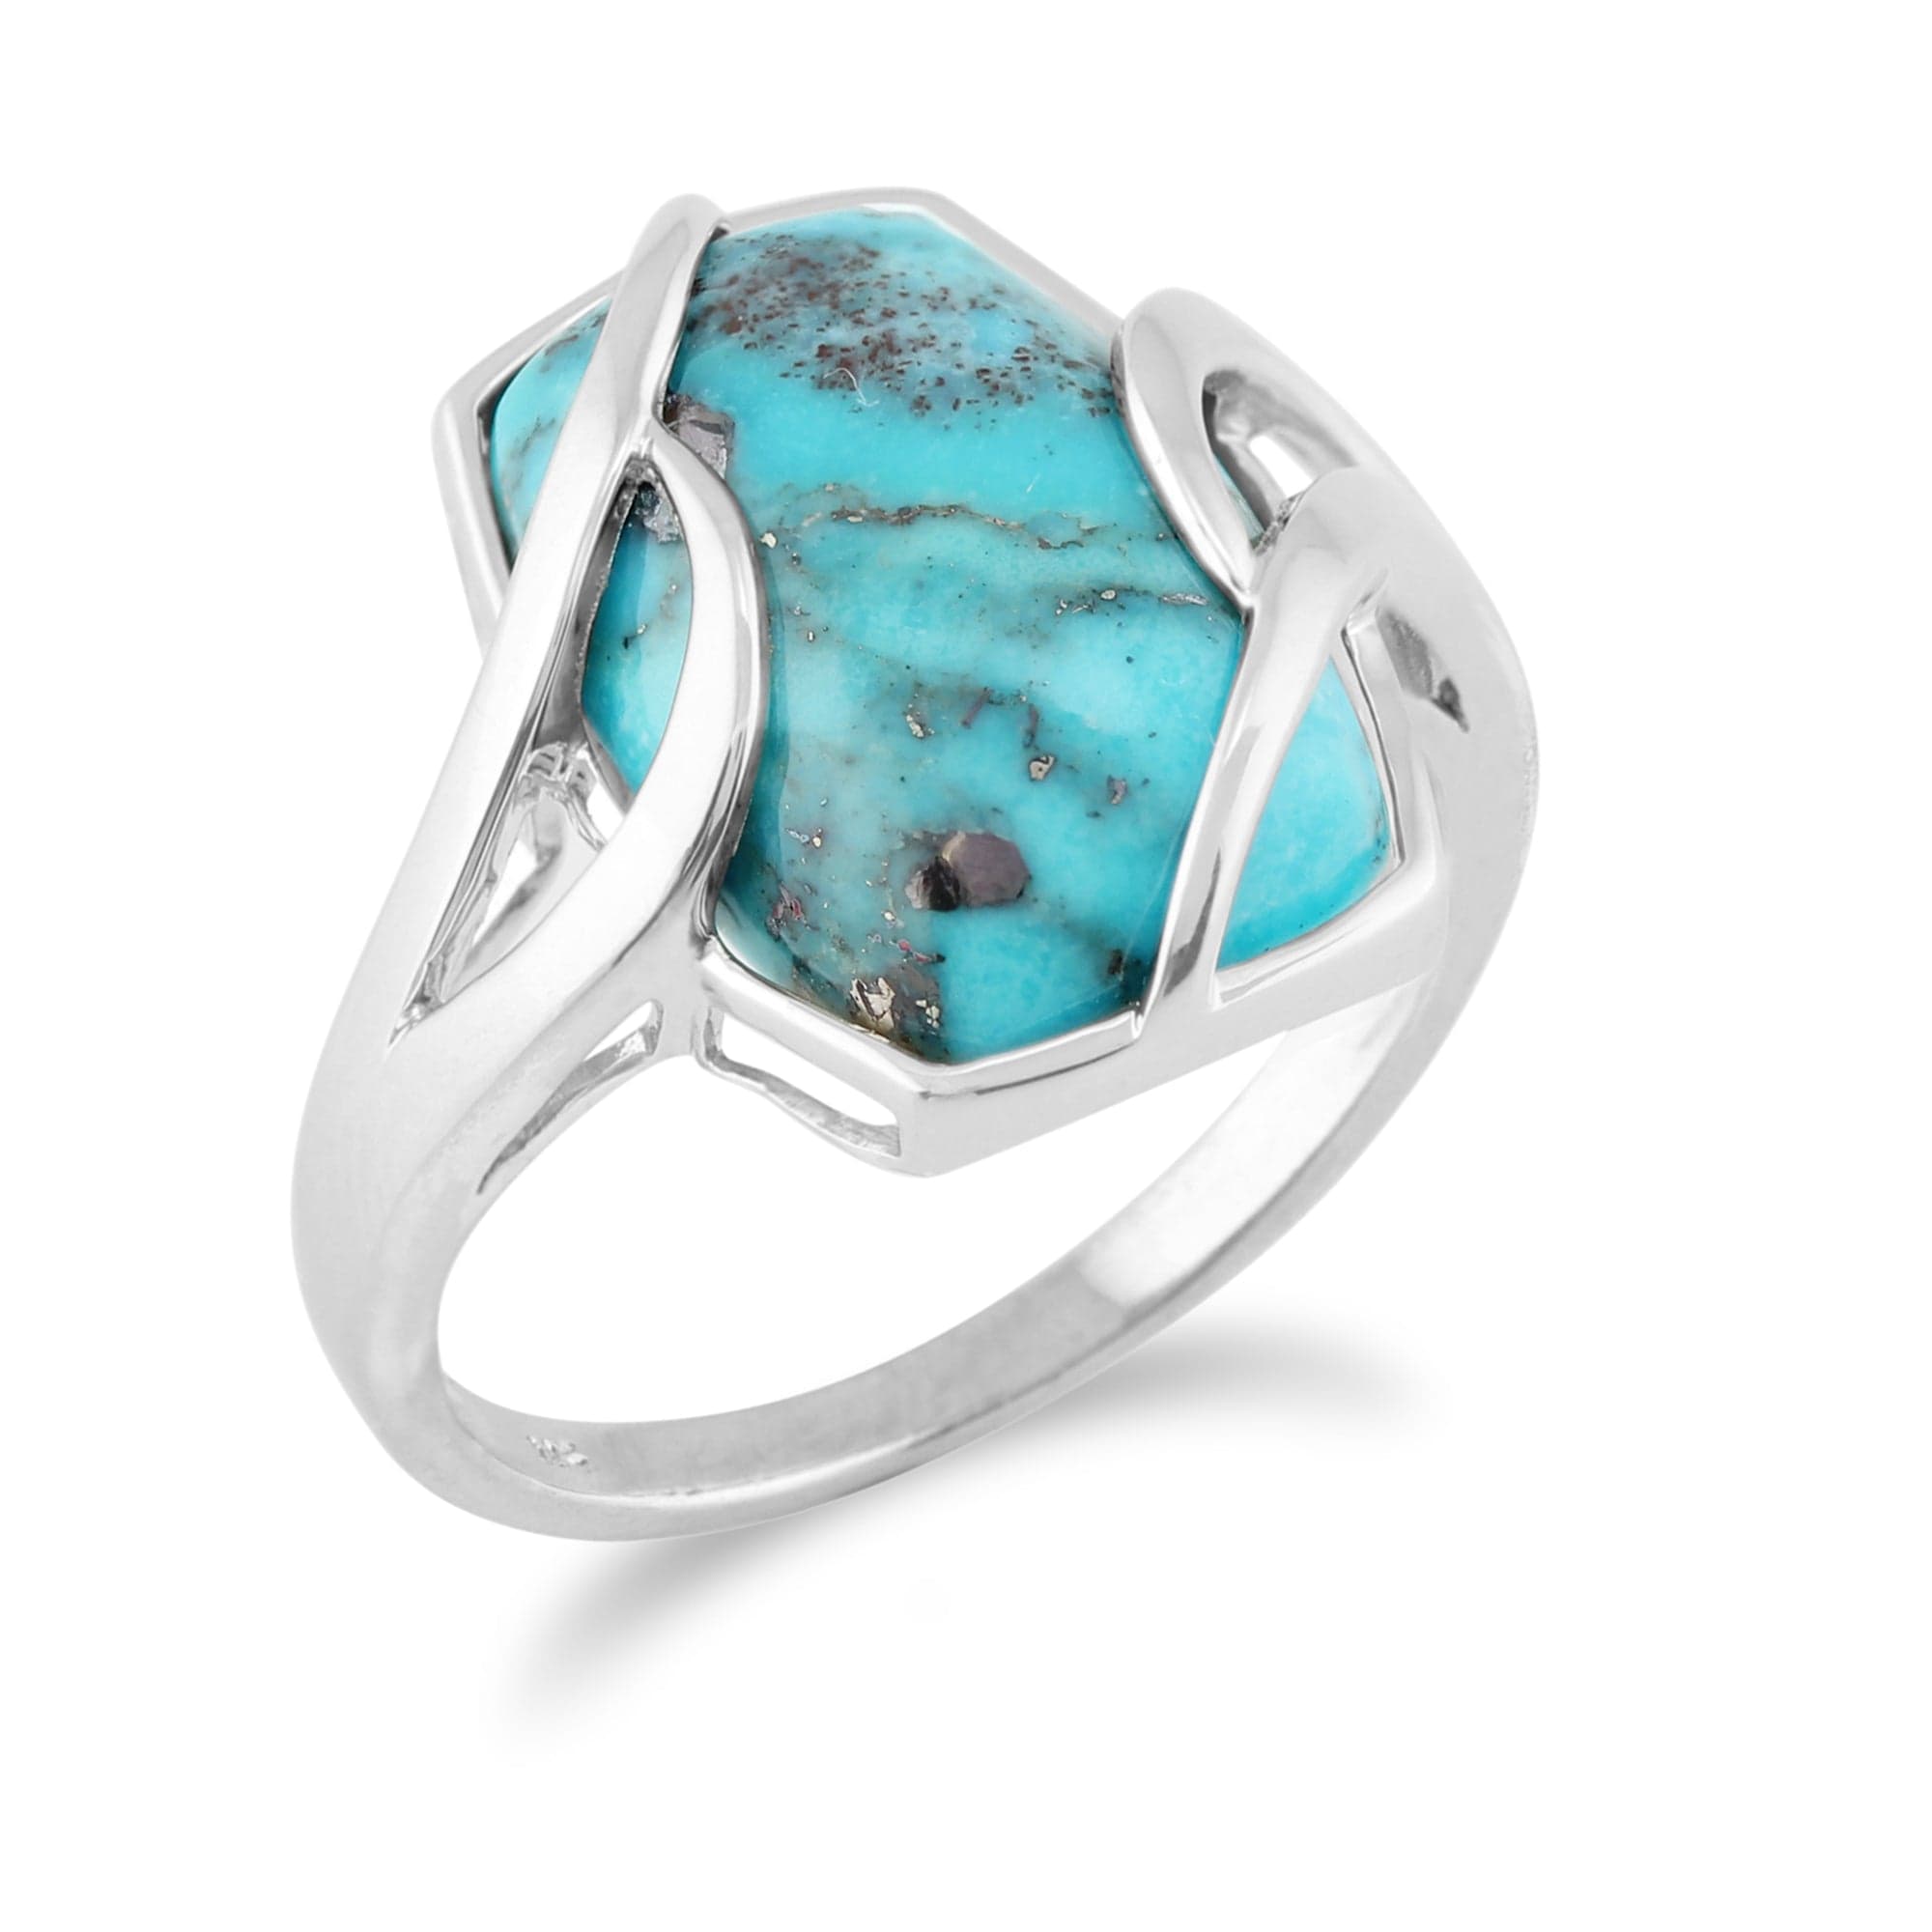 271R016201925 Gemondo Sterling Silver 6.50ct Turquoise Cabochon Contemporary Baguette Ring 2